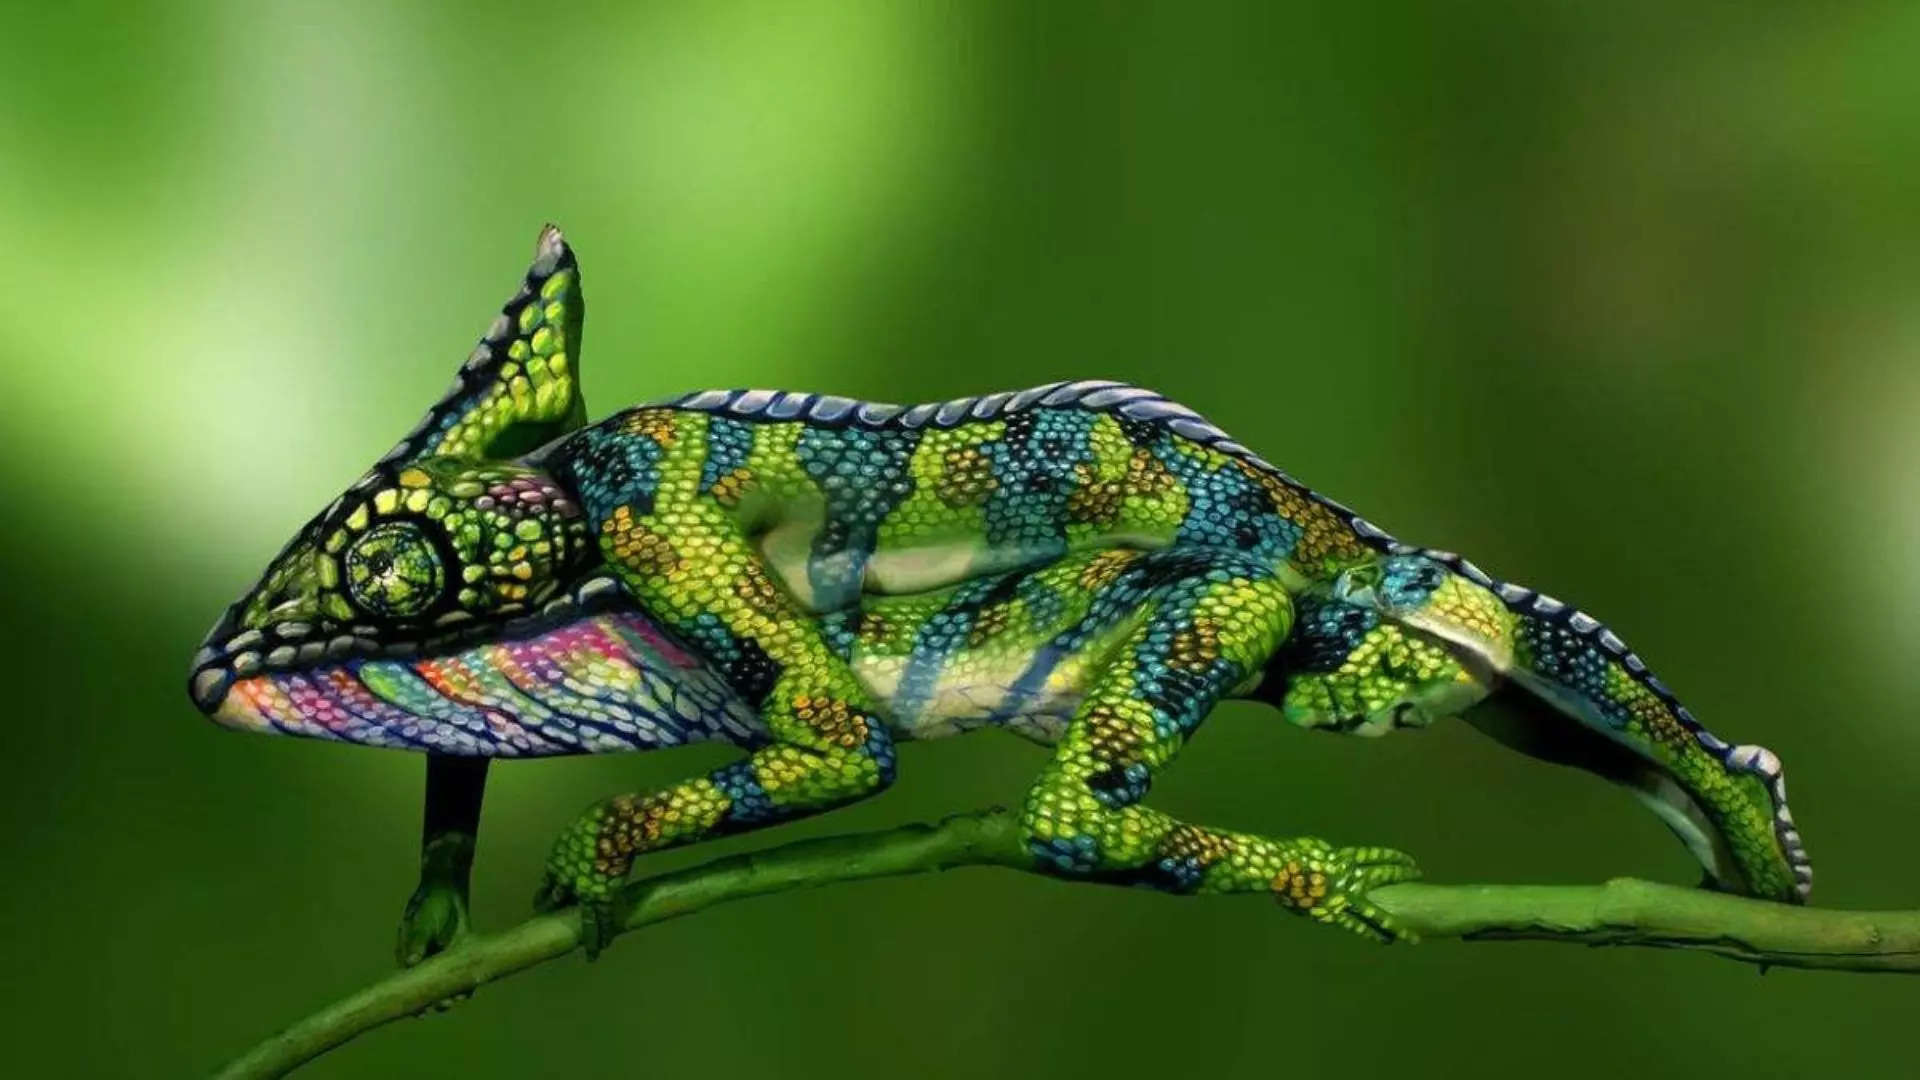 Optical illusion of a chameleon hides two women within  Picture courtesy Johannes Stoetter